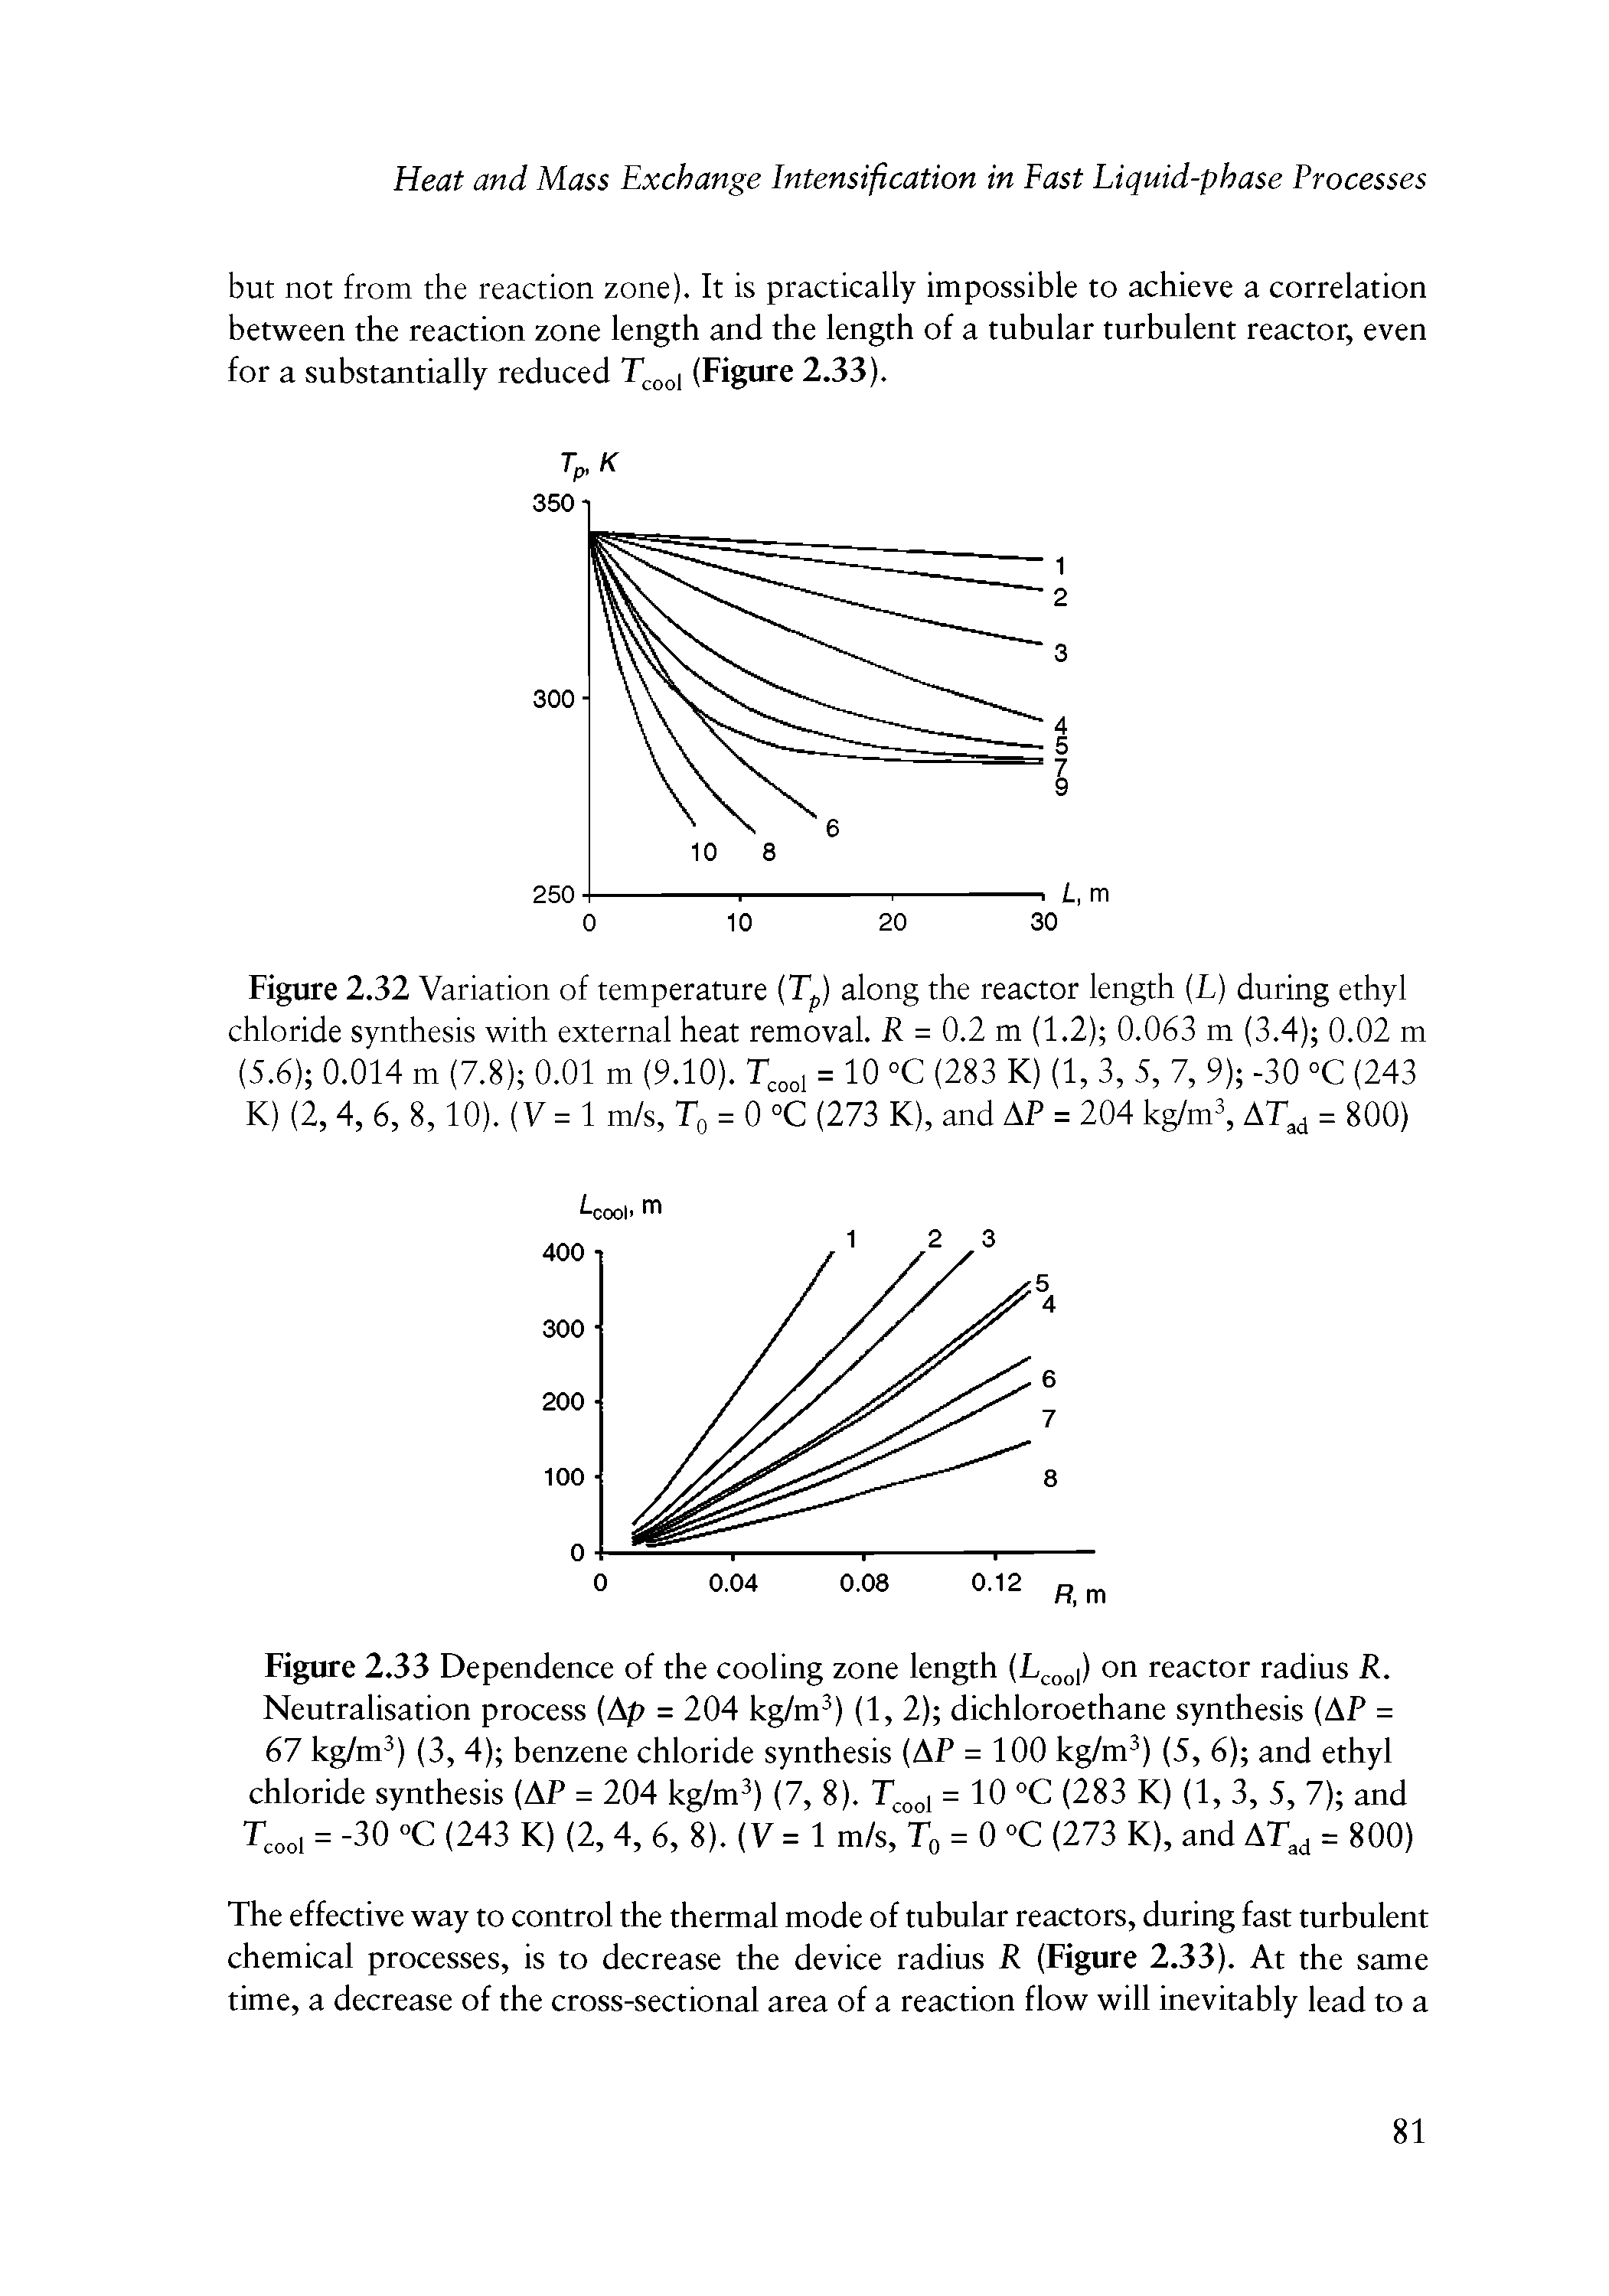 Figure 2.33 Dependence of the cooling zone length L ggi) on reactor radius R. Neutralisation process (Ap = 204 kg/m ) (1,2) dichloroethane synthesis (AP =...